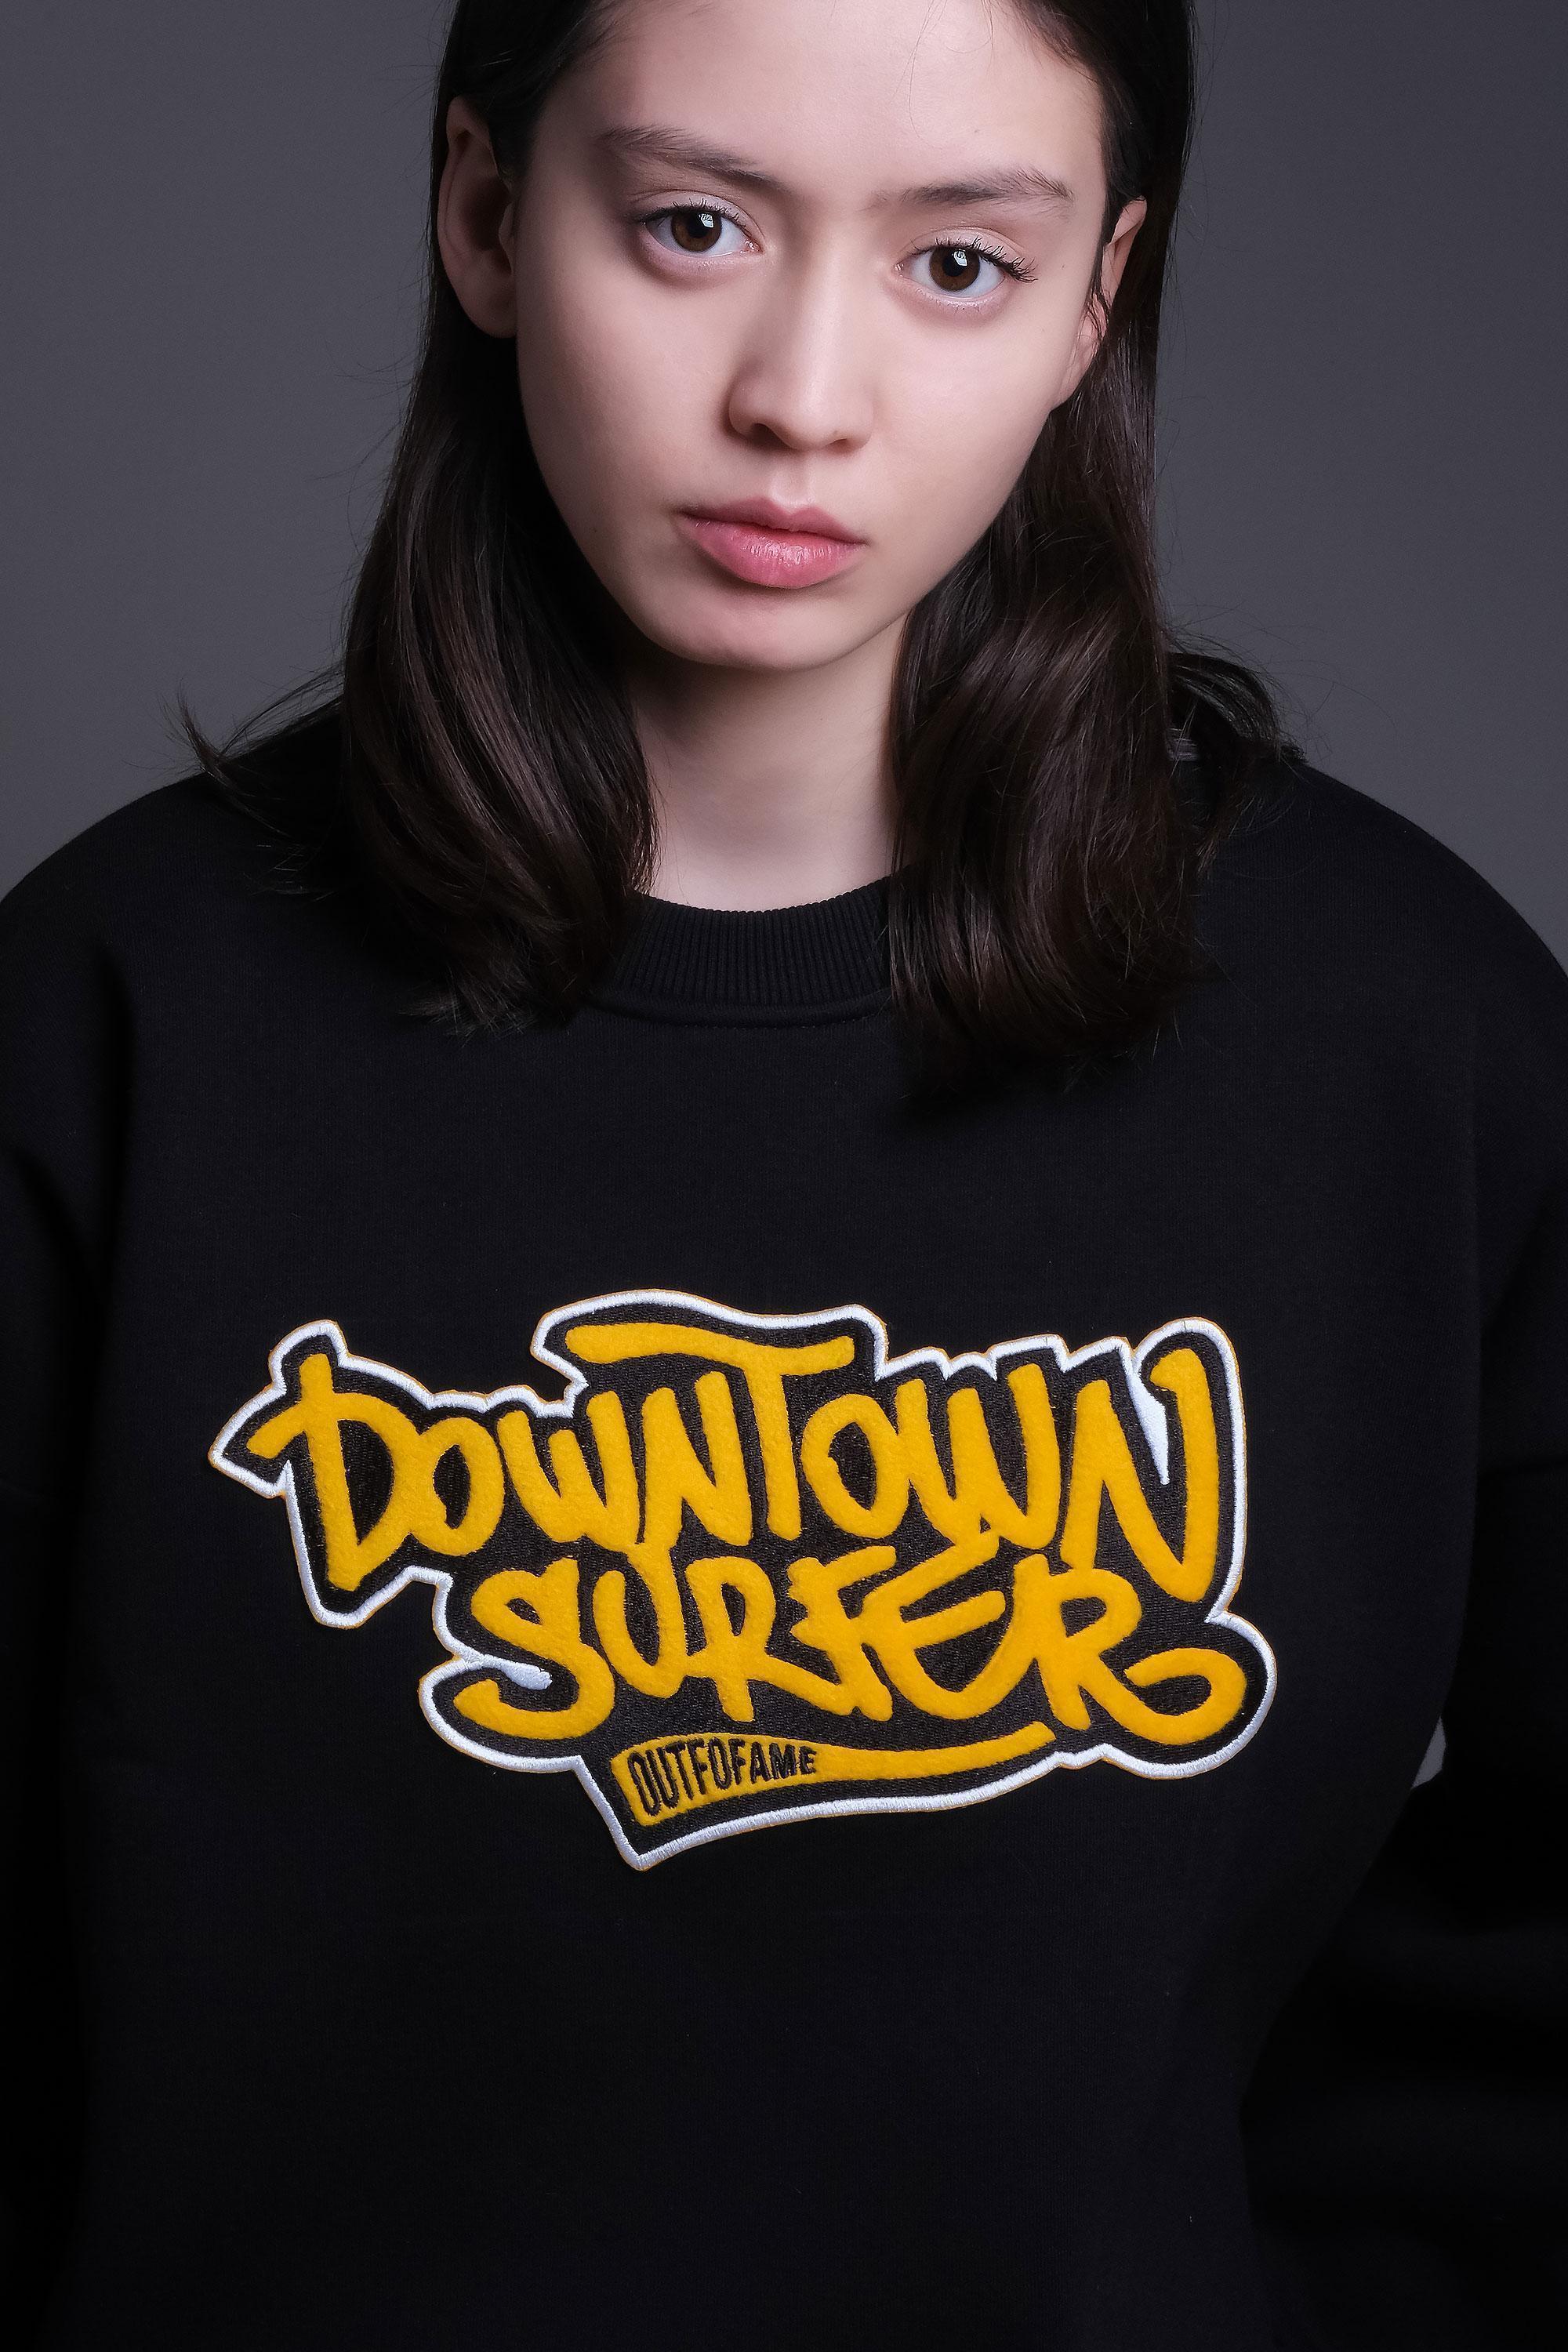 Свитшот "Downtown surfer" OUT FO FAME